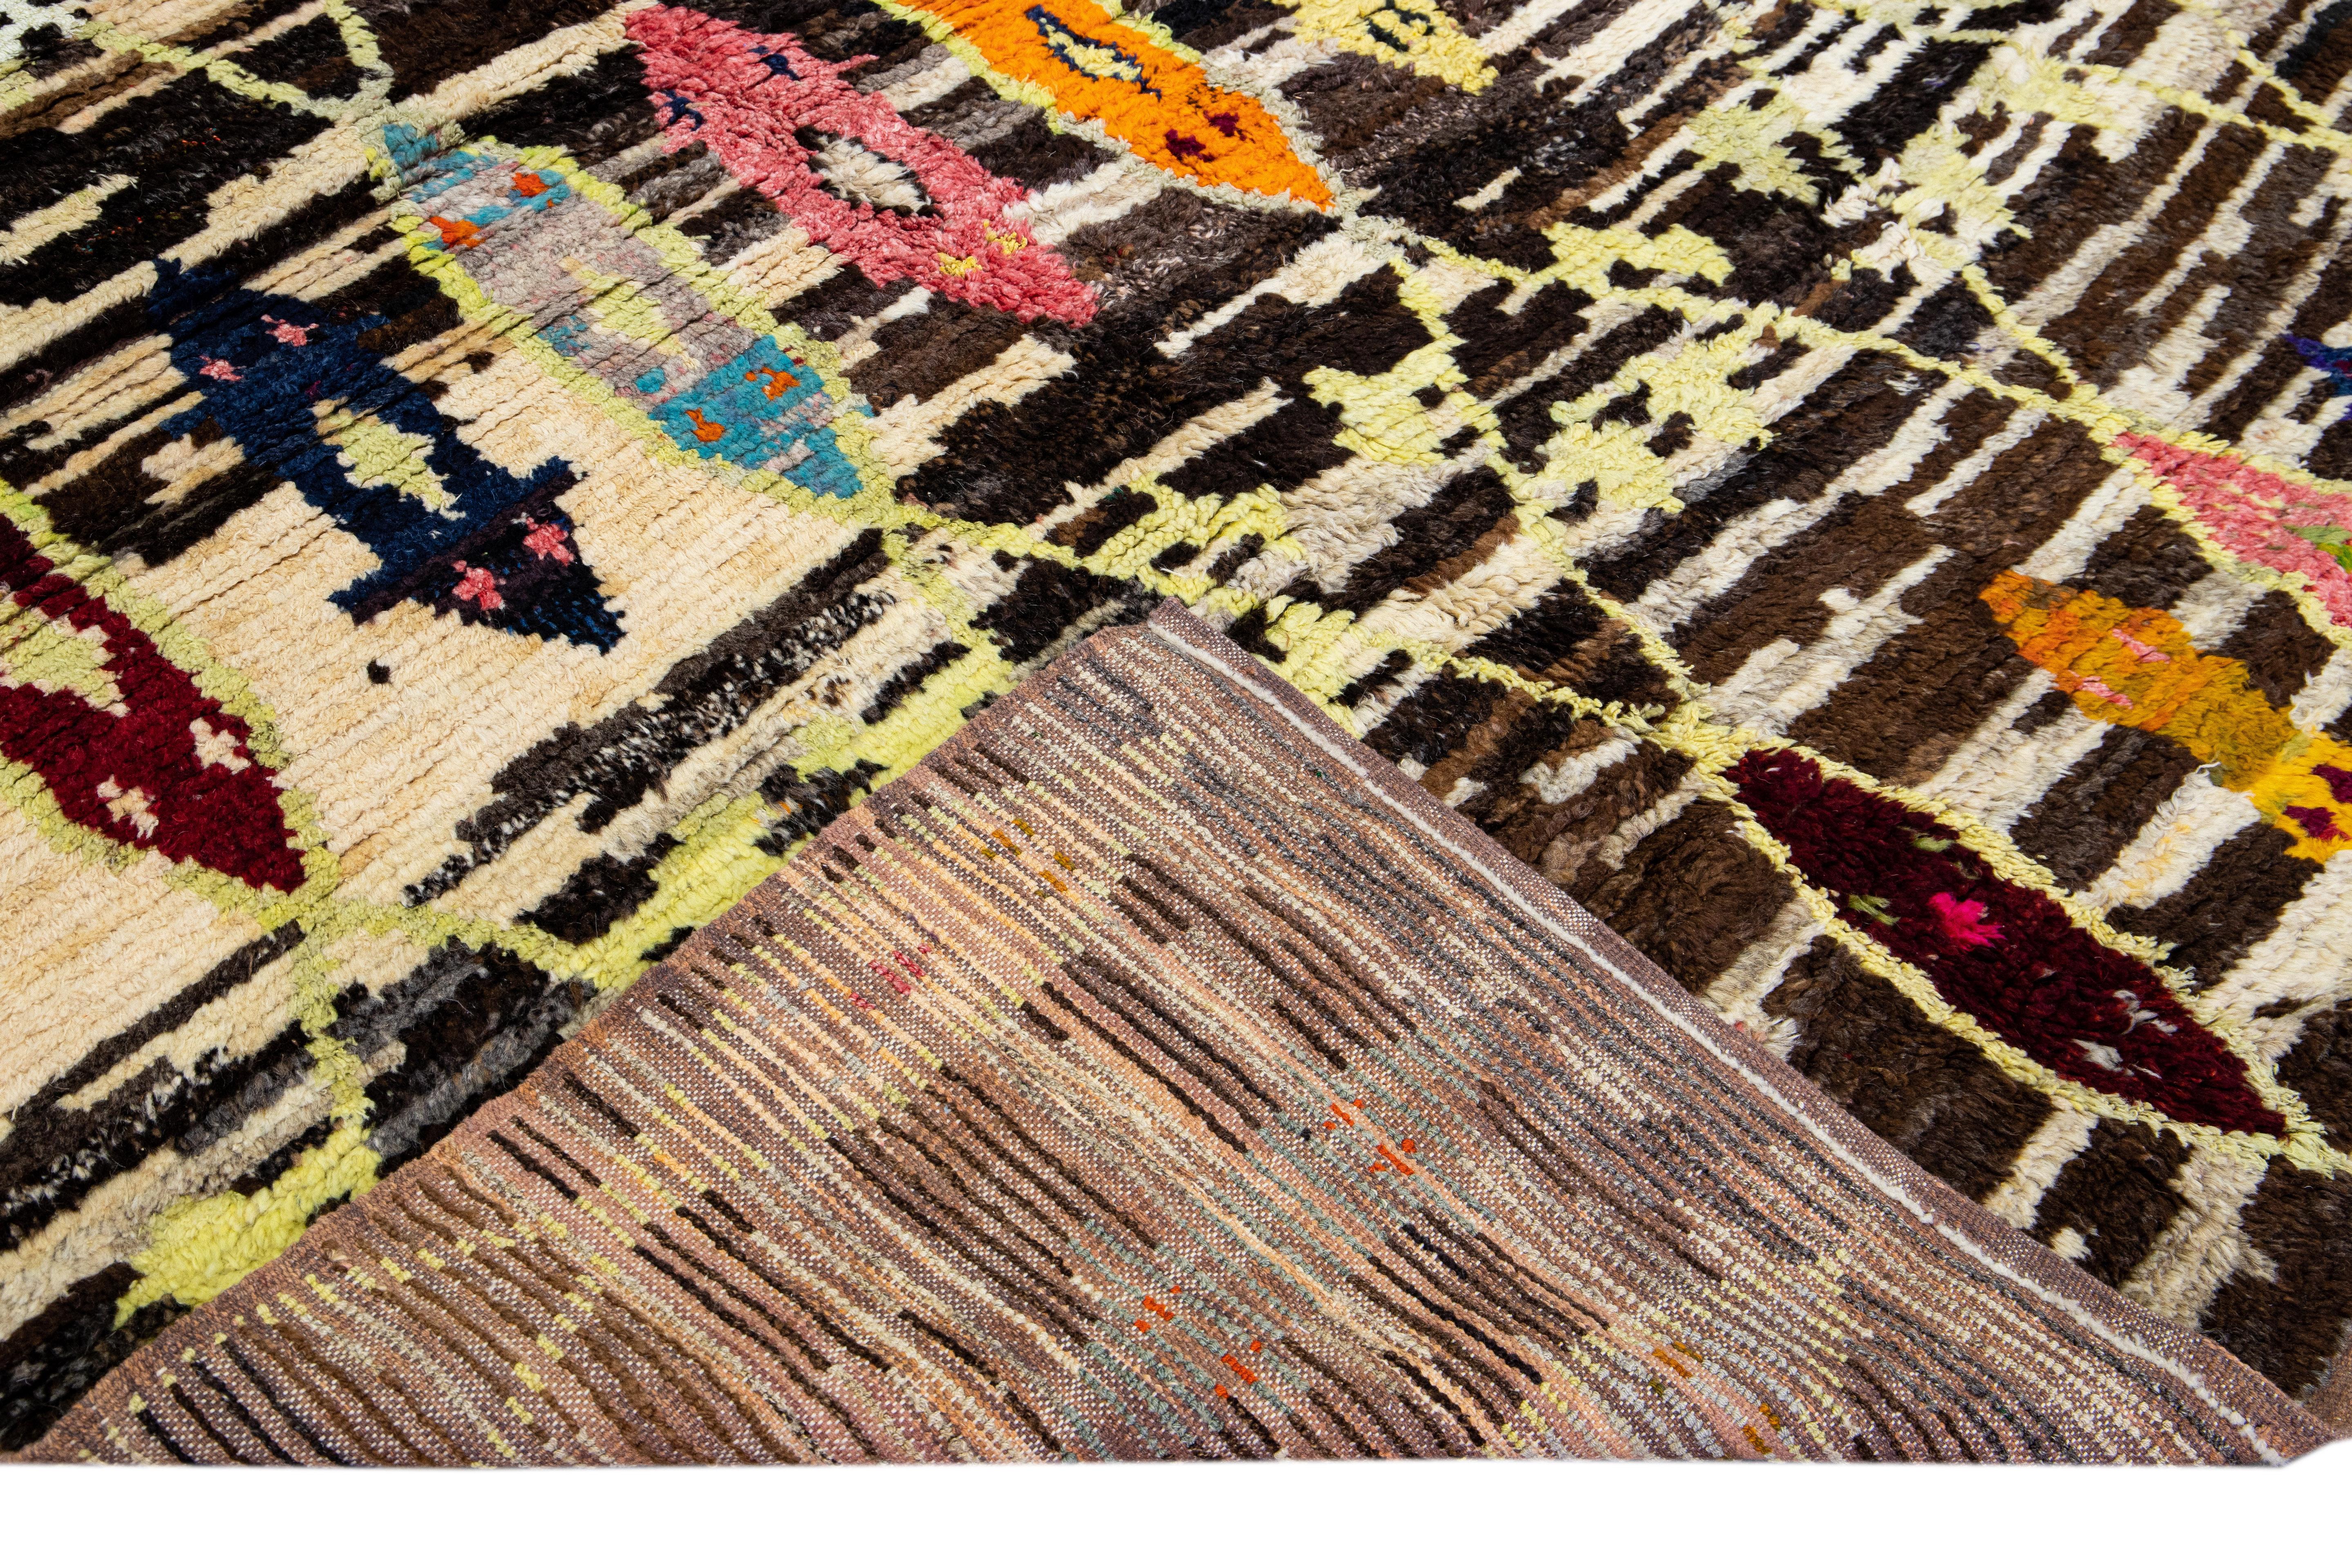 Beautiful Turkish Tulu handmade wool rug with a beige and brown field. This Modern rug has multicolor accents features a gorgeous all-over geometric tribal design.

This rug measures: 10'1 x 14'.

Our rugs are professional cleaning before